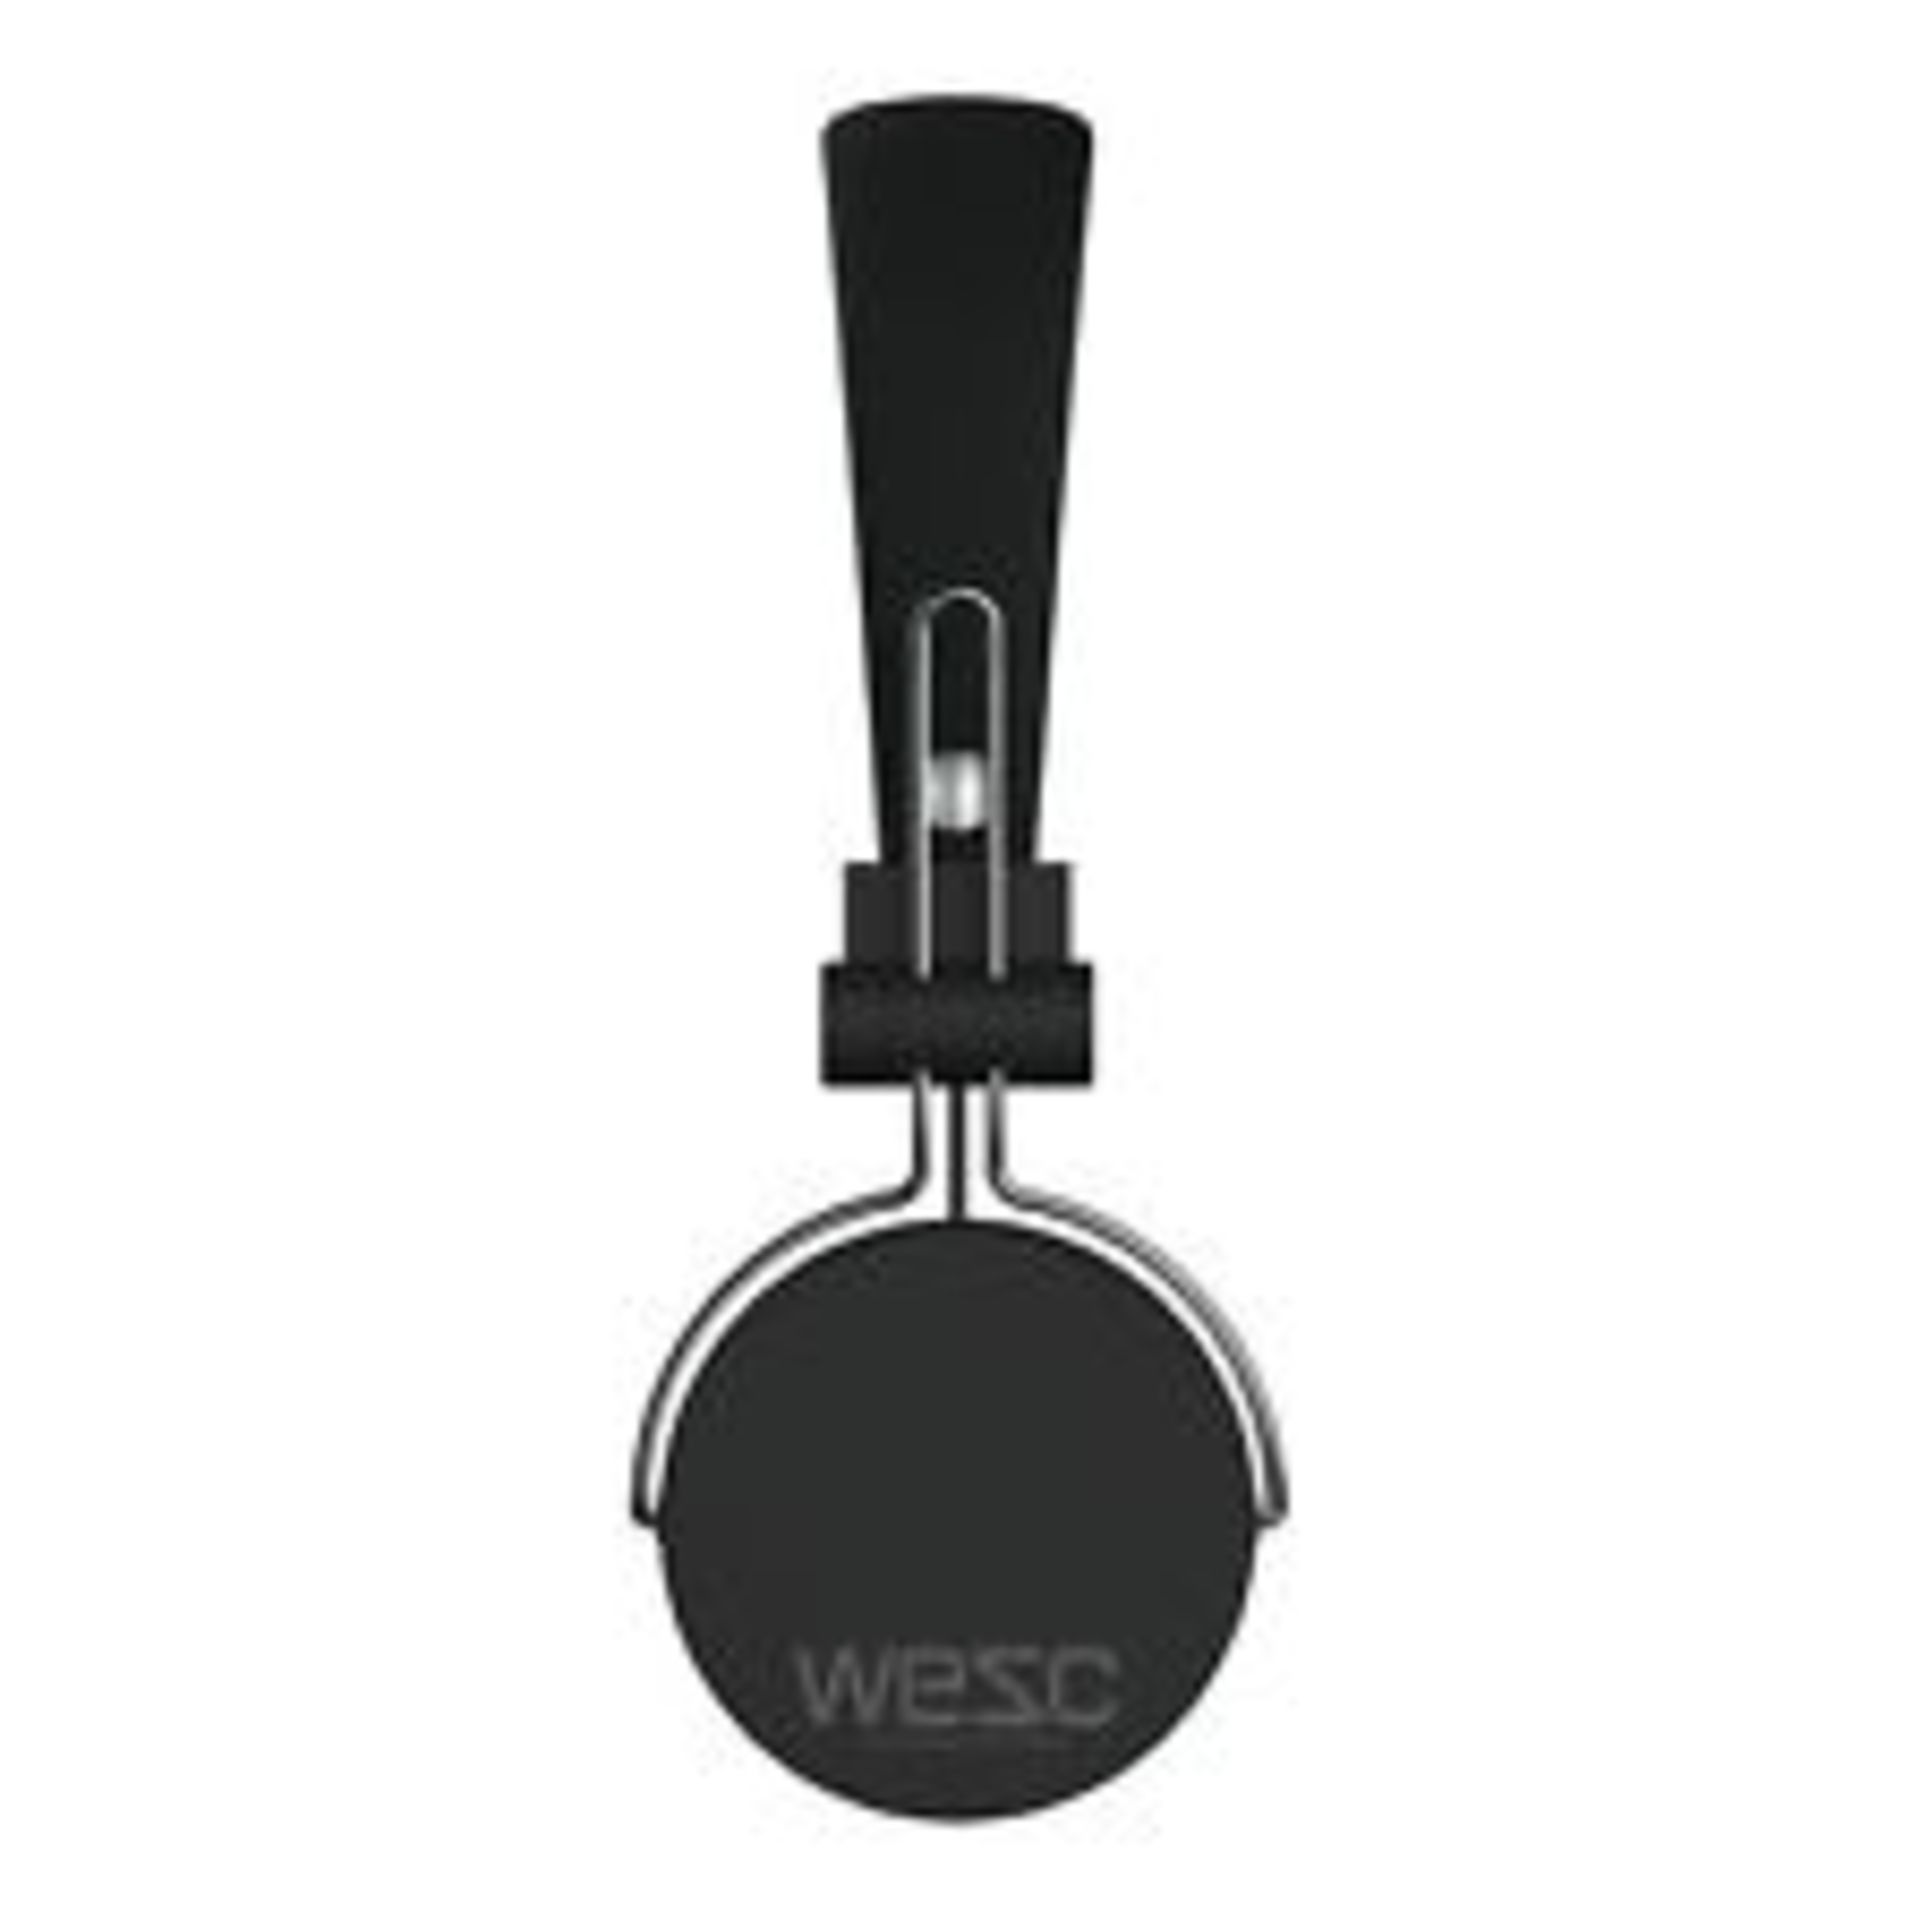 V Brand New WESC M30 On-Ear Wired Headphones - Amazon Price £69.99 - Professionally Tuned 40mm